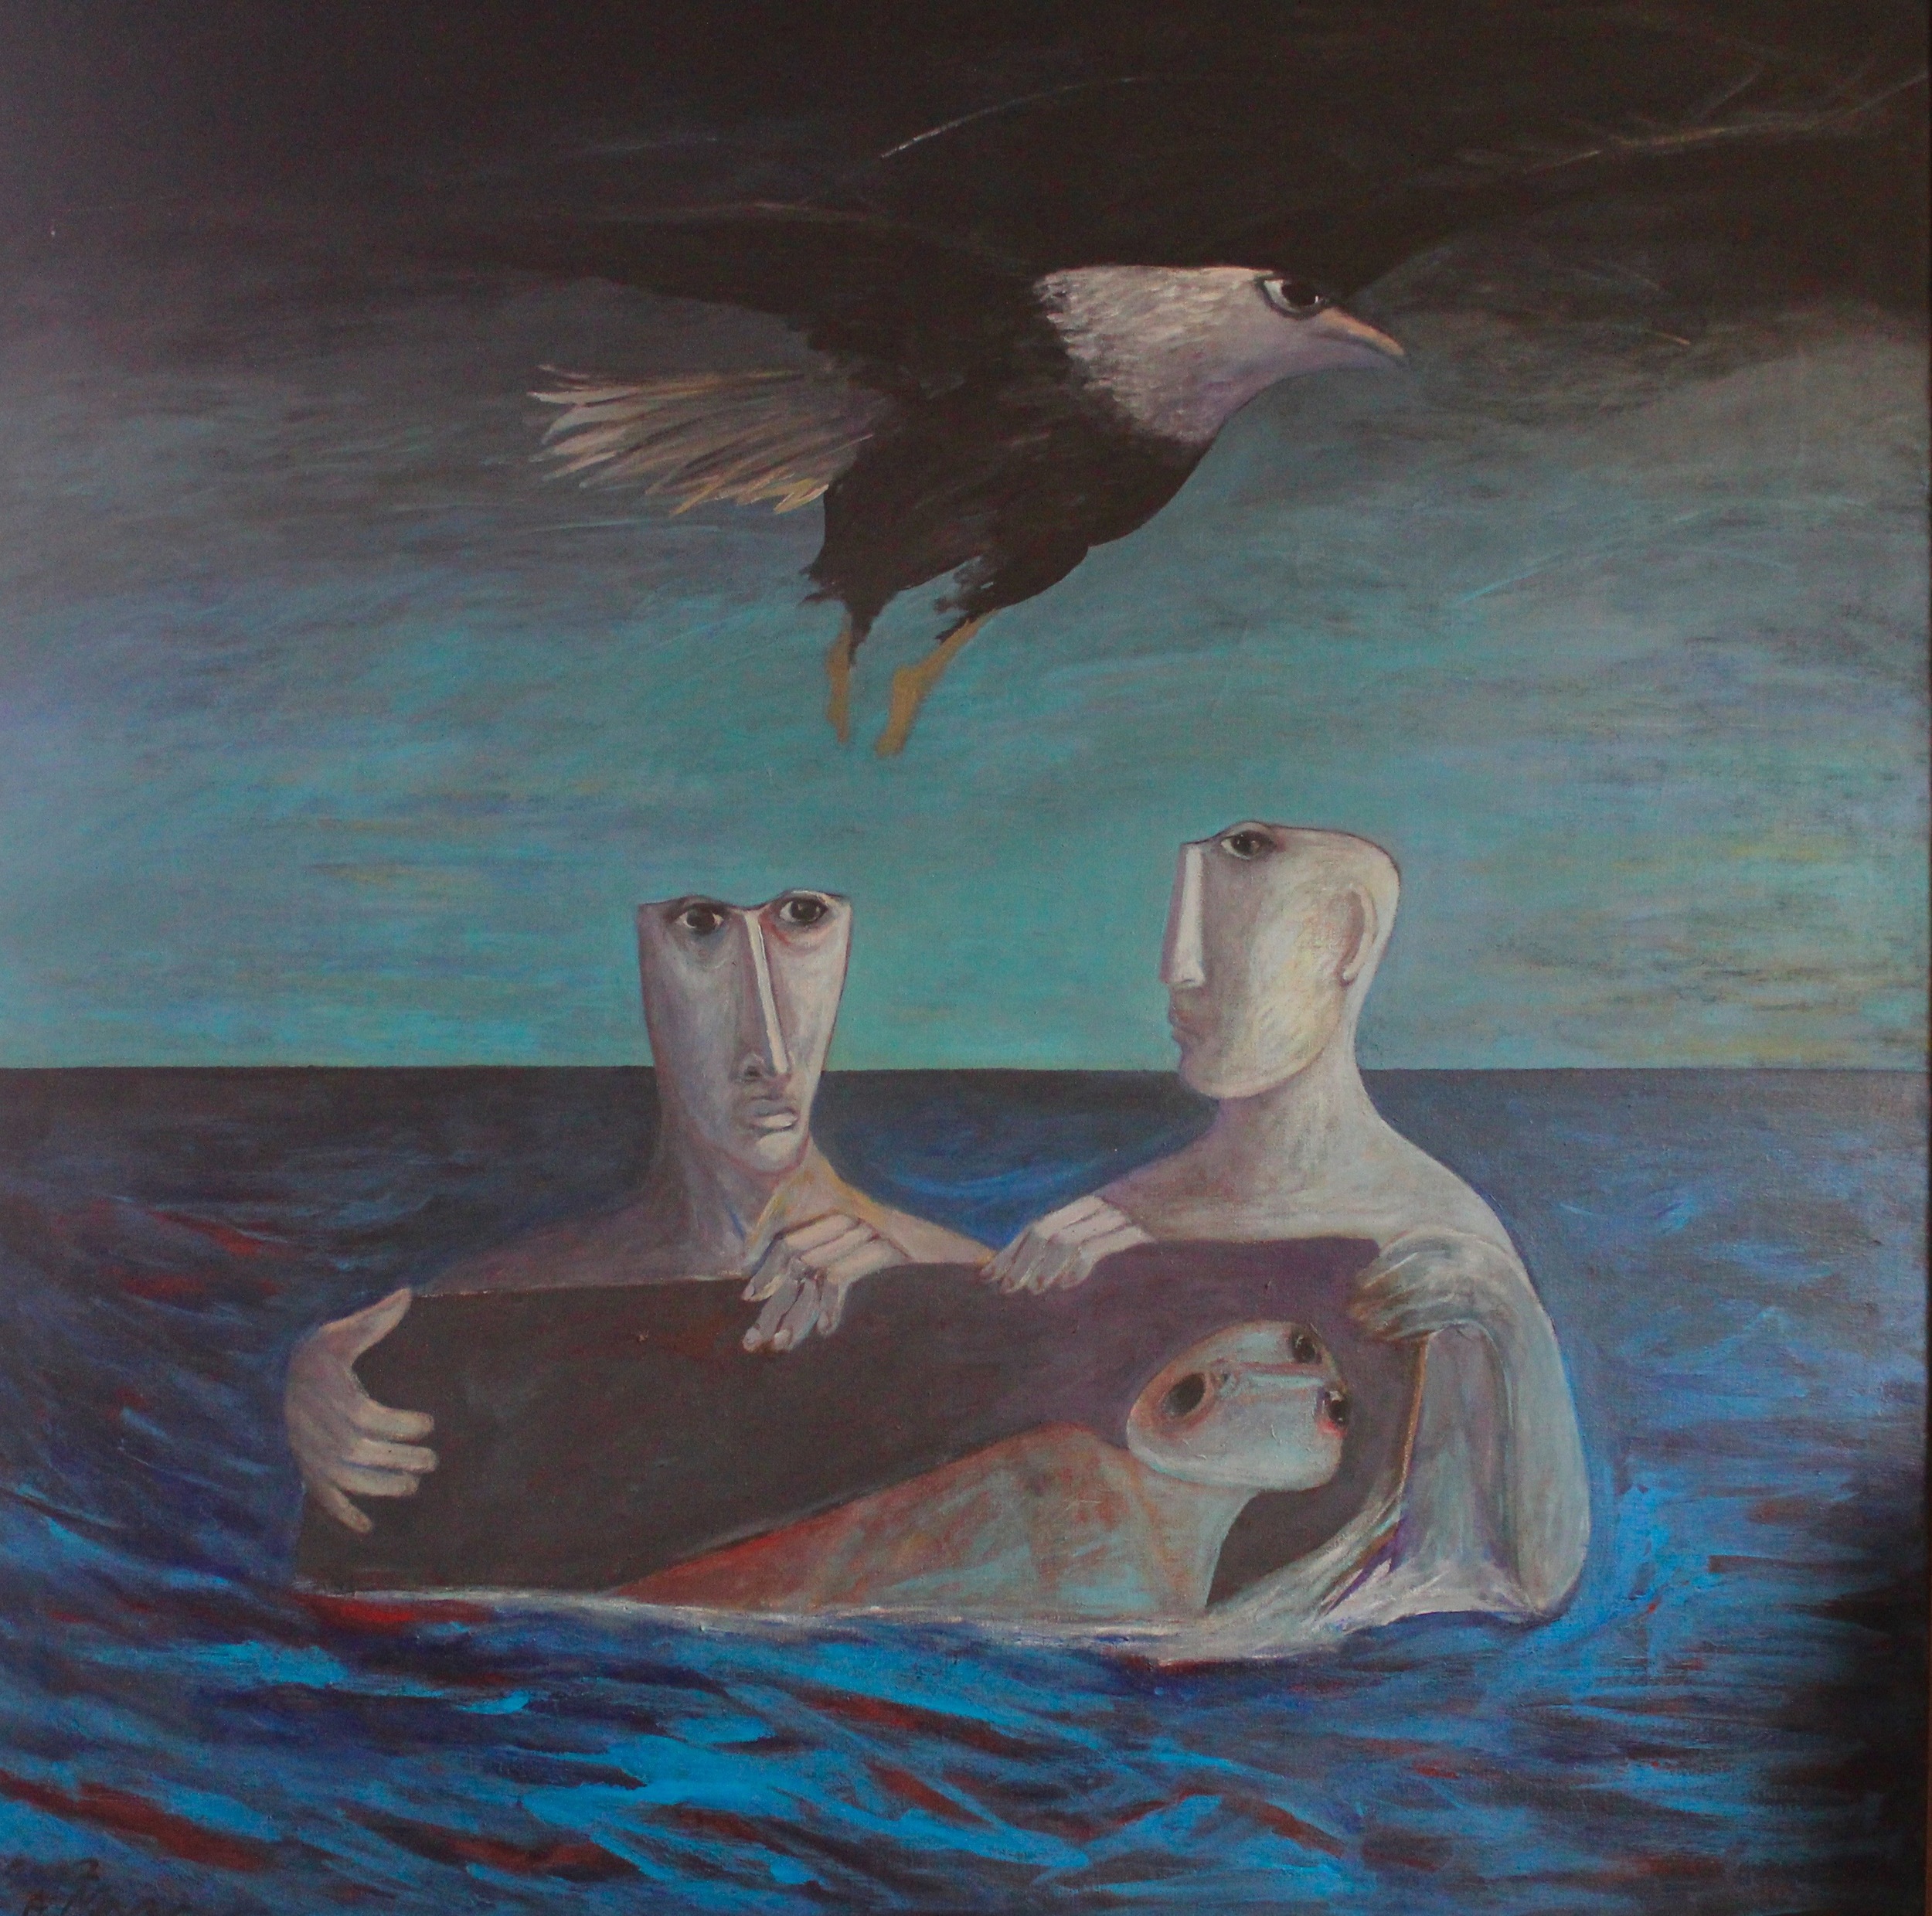  Ahmed Morsi,&nbsp;Burial in Blue Waters,&nbsp;2002,&nbsp;Acrylic on canvas,&nbsp;175 x 195 cm. Sharjah Art Foundation Collection.    